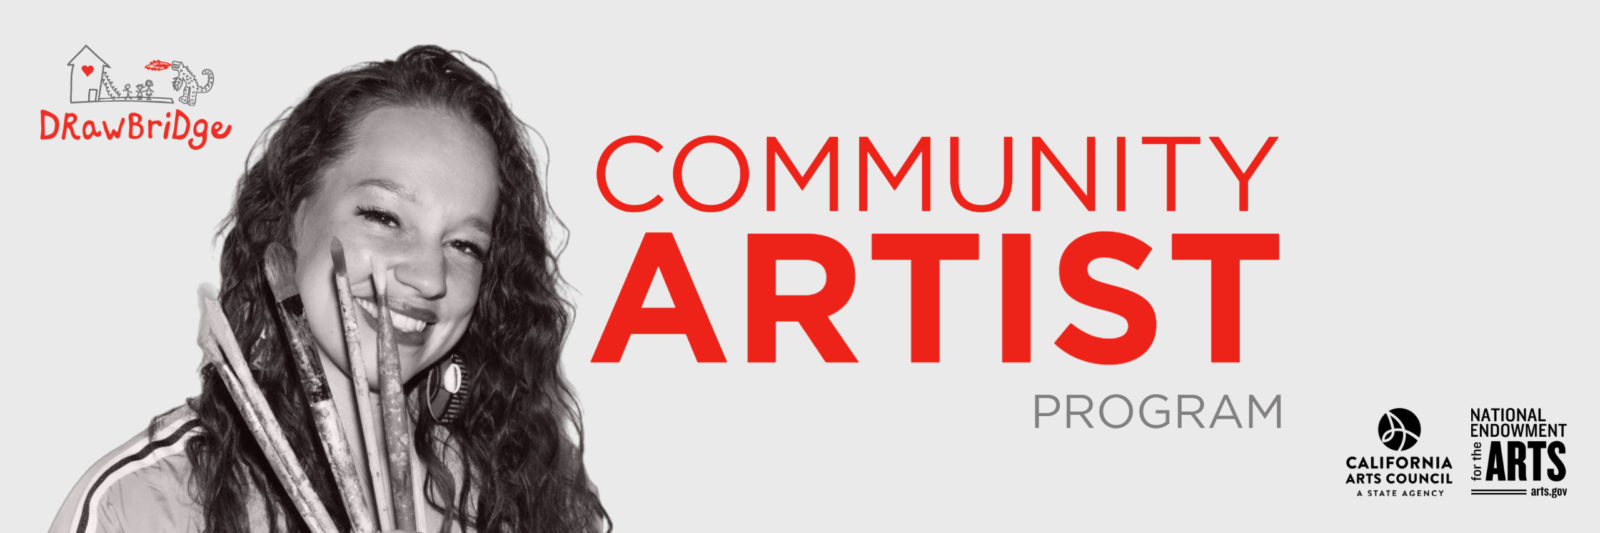 DrawBridge connects local artists with youth in shelters, affordable housing facilities, and community centers throughout the region.